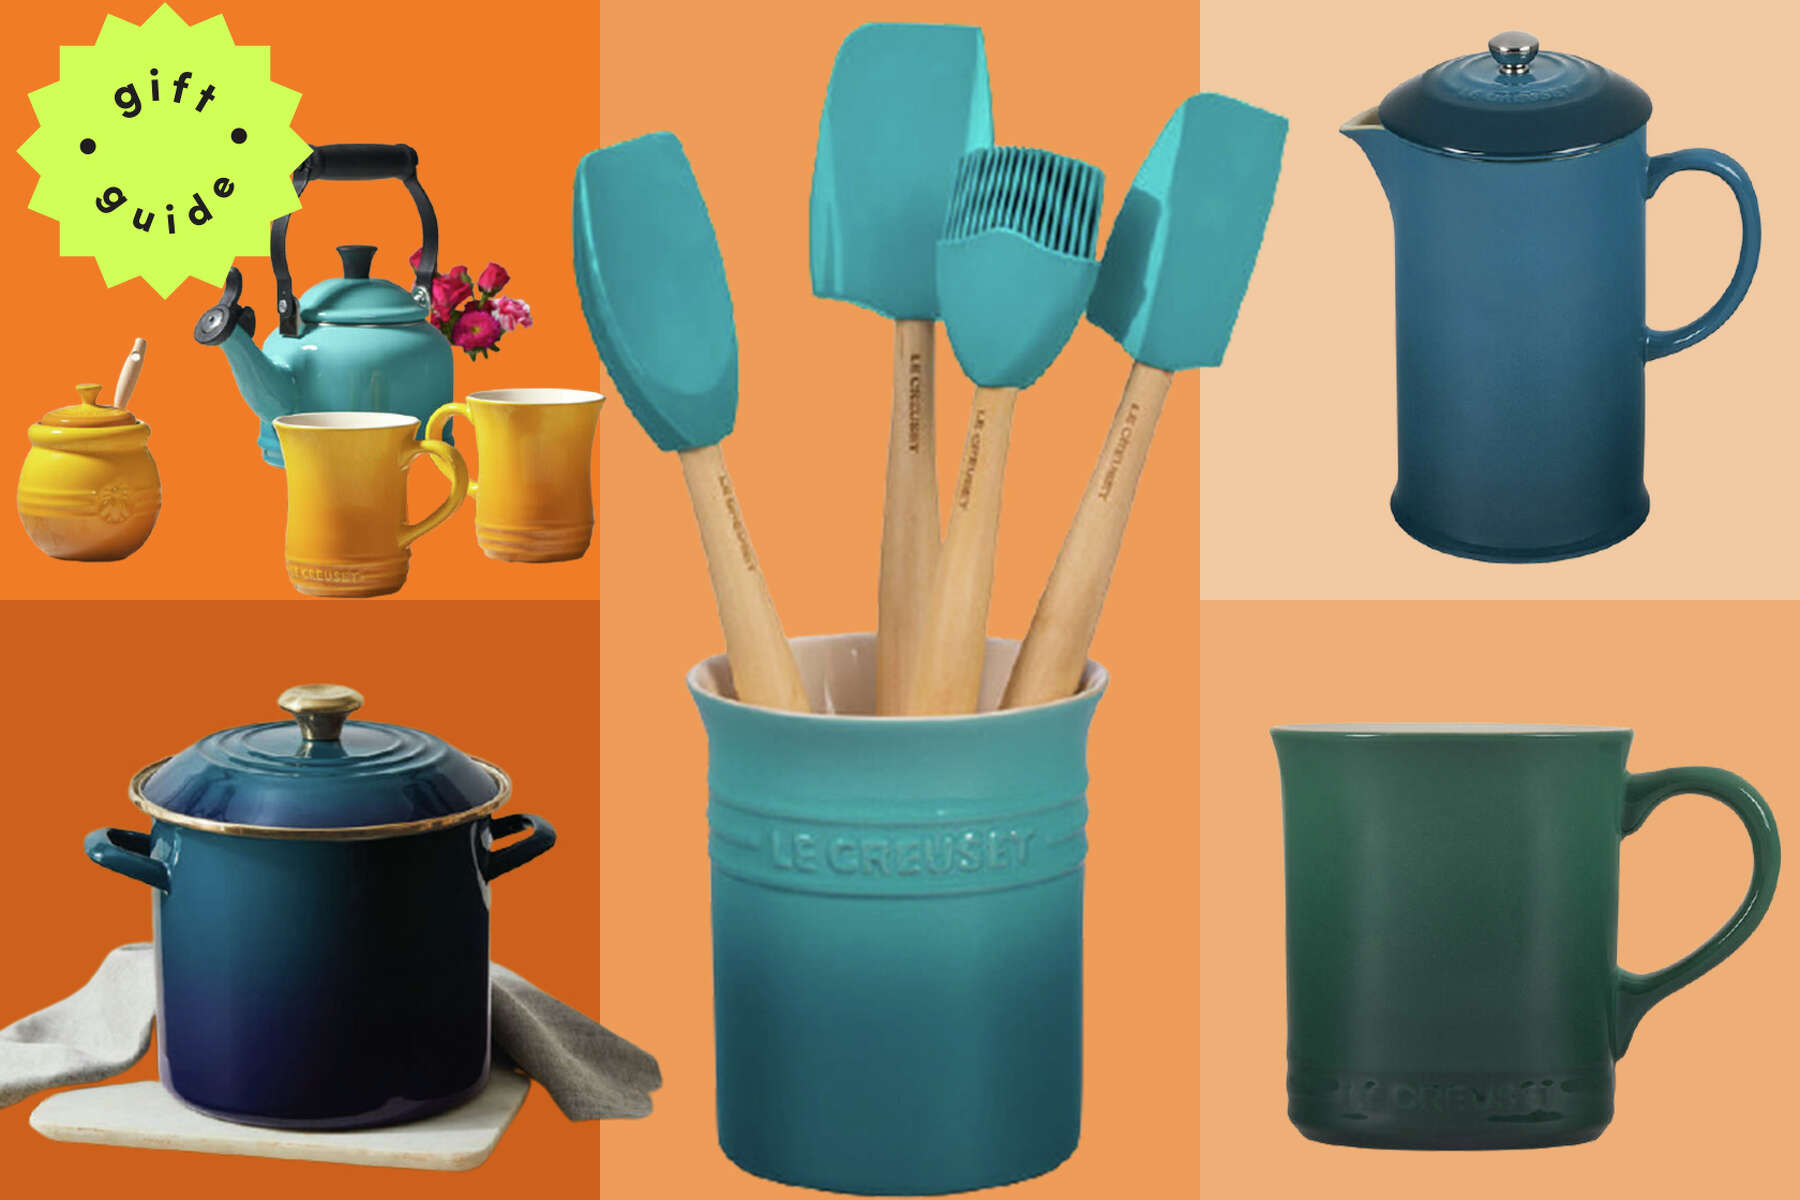 digital fritid Titicacasøen Le Creuset gifts under $100: French presses, mugs and more